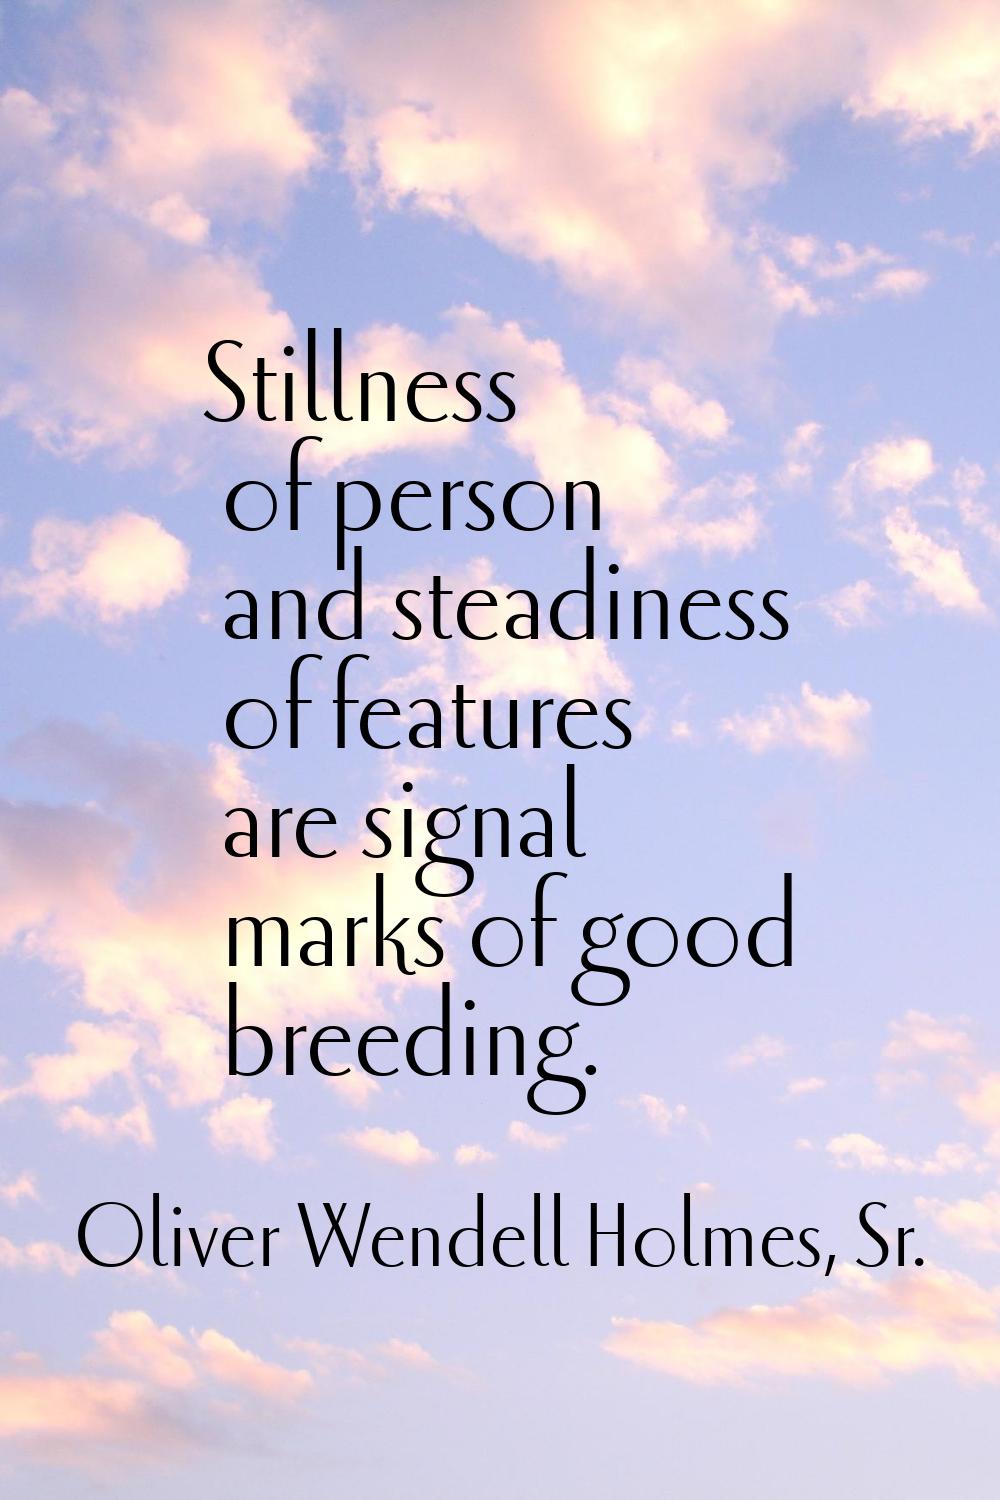 Stillness of person and steadiness of features are signal marks of good breeding.